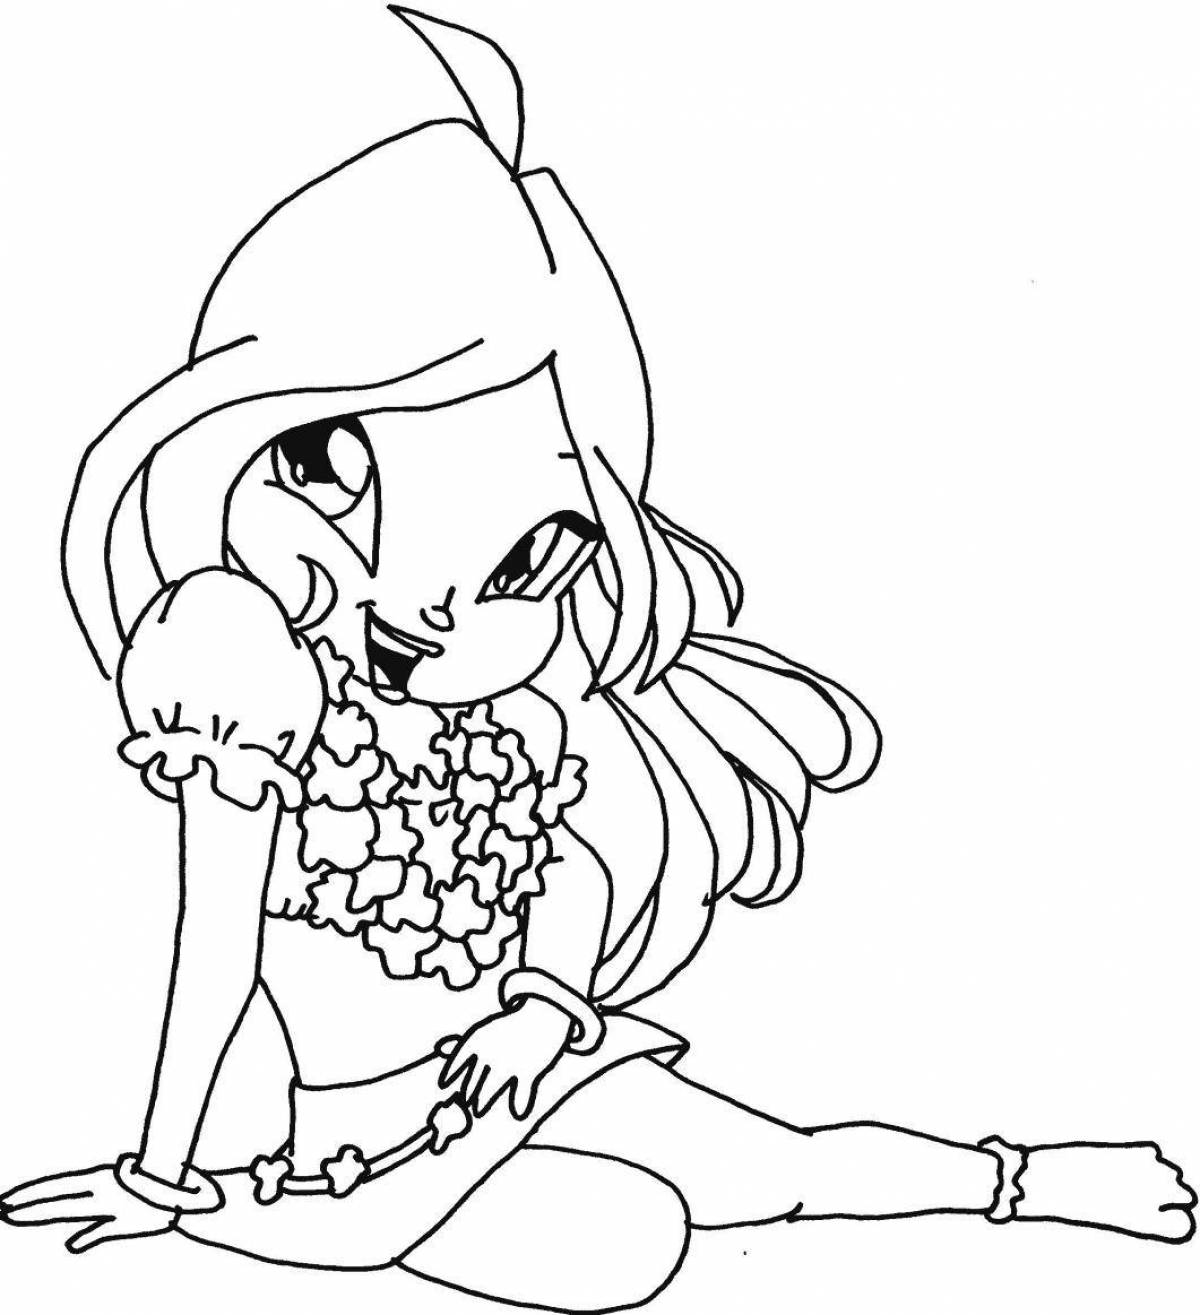 Coloring page bizarre flowering dog